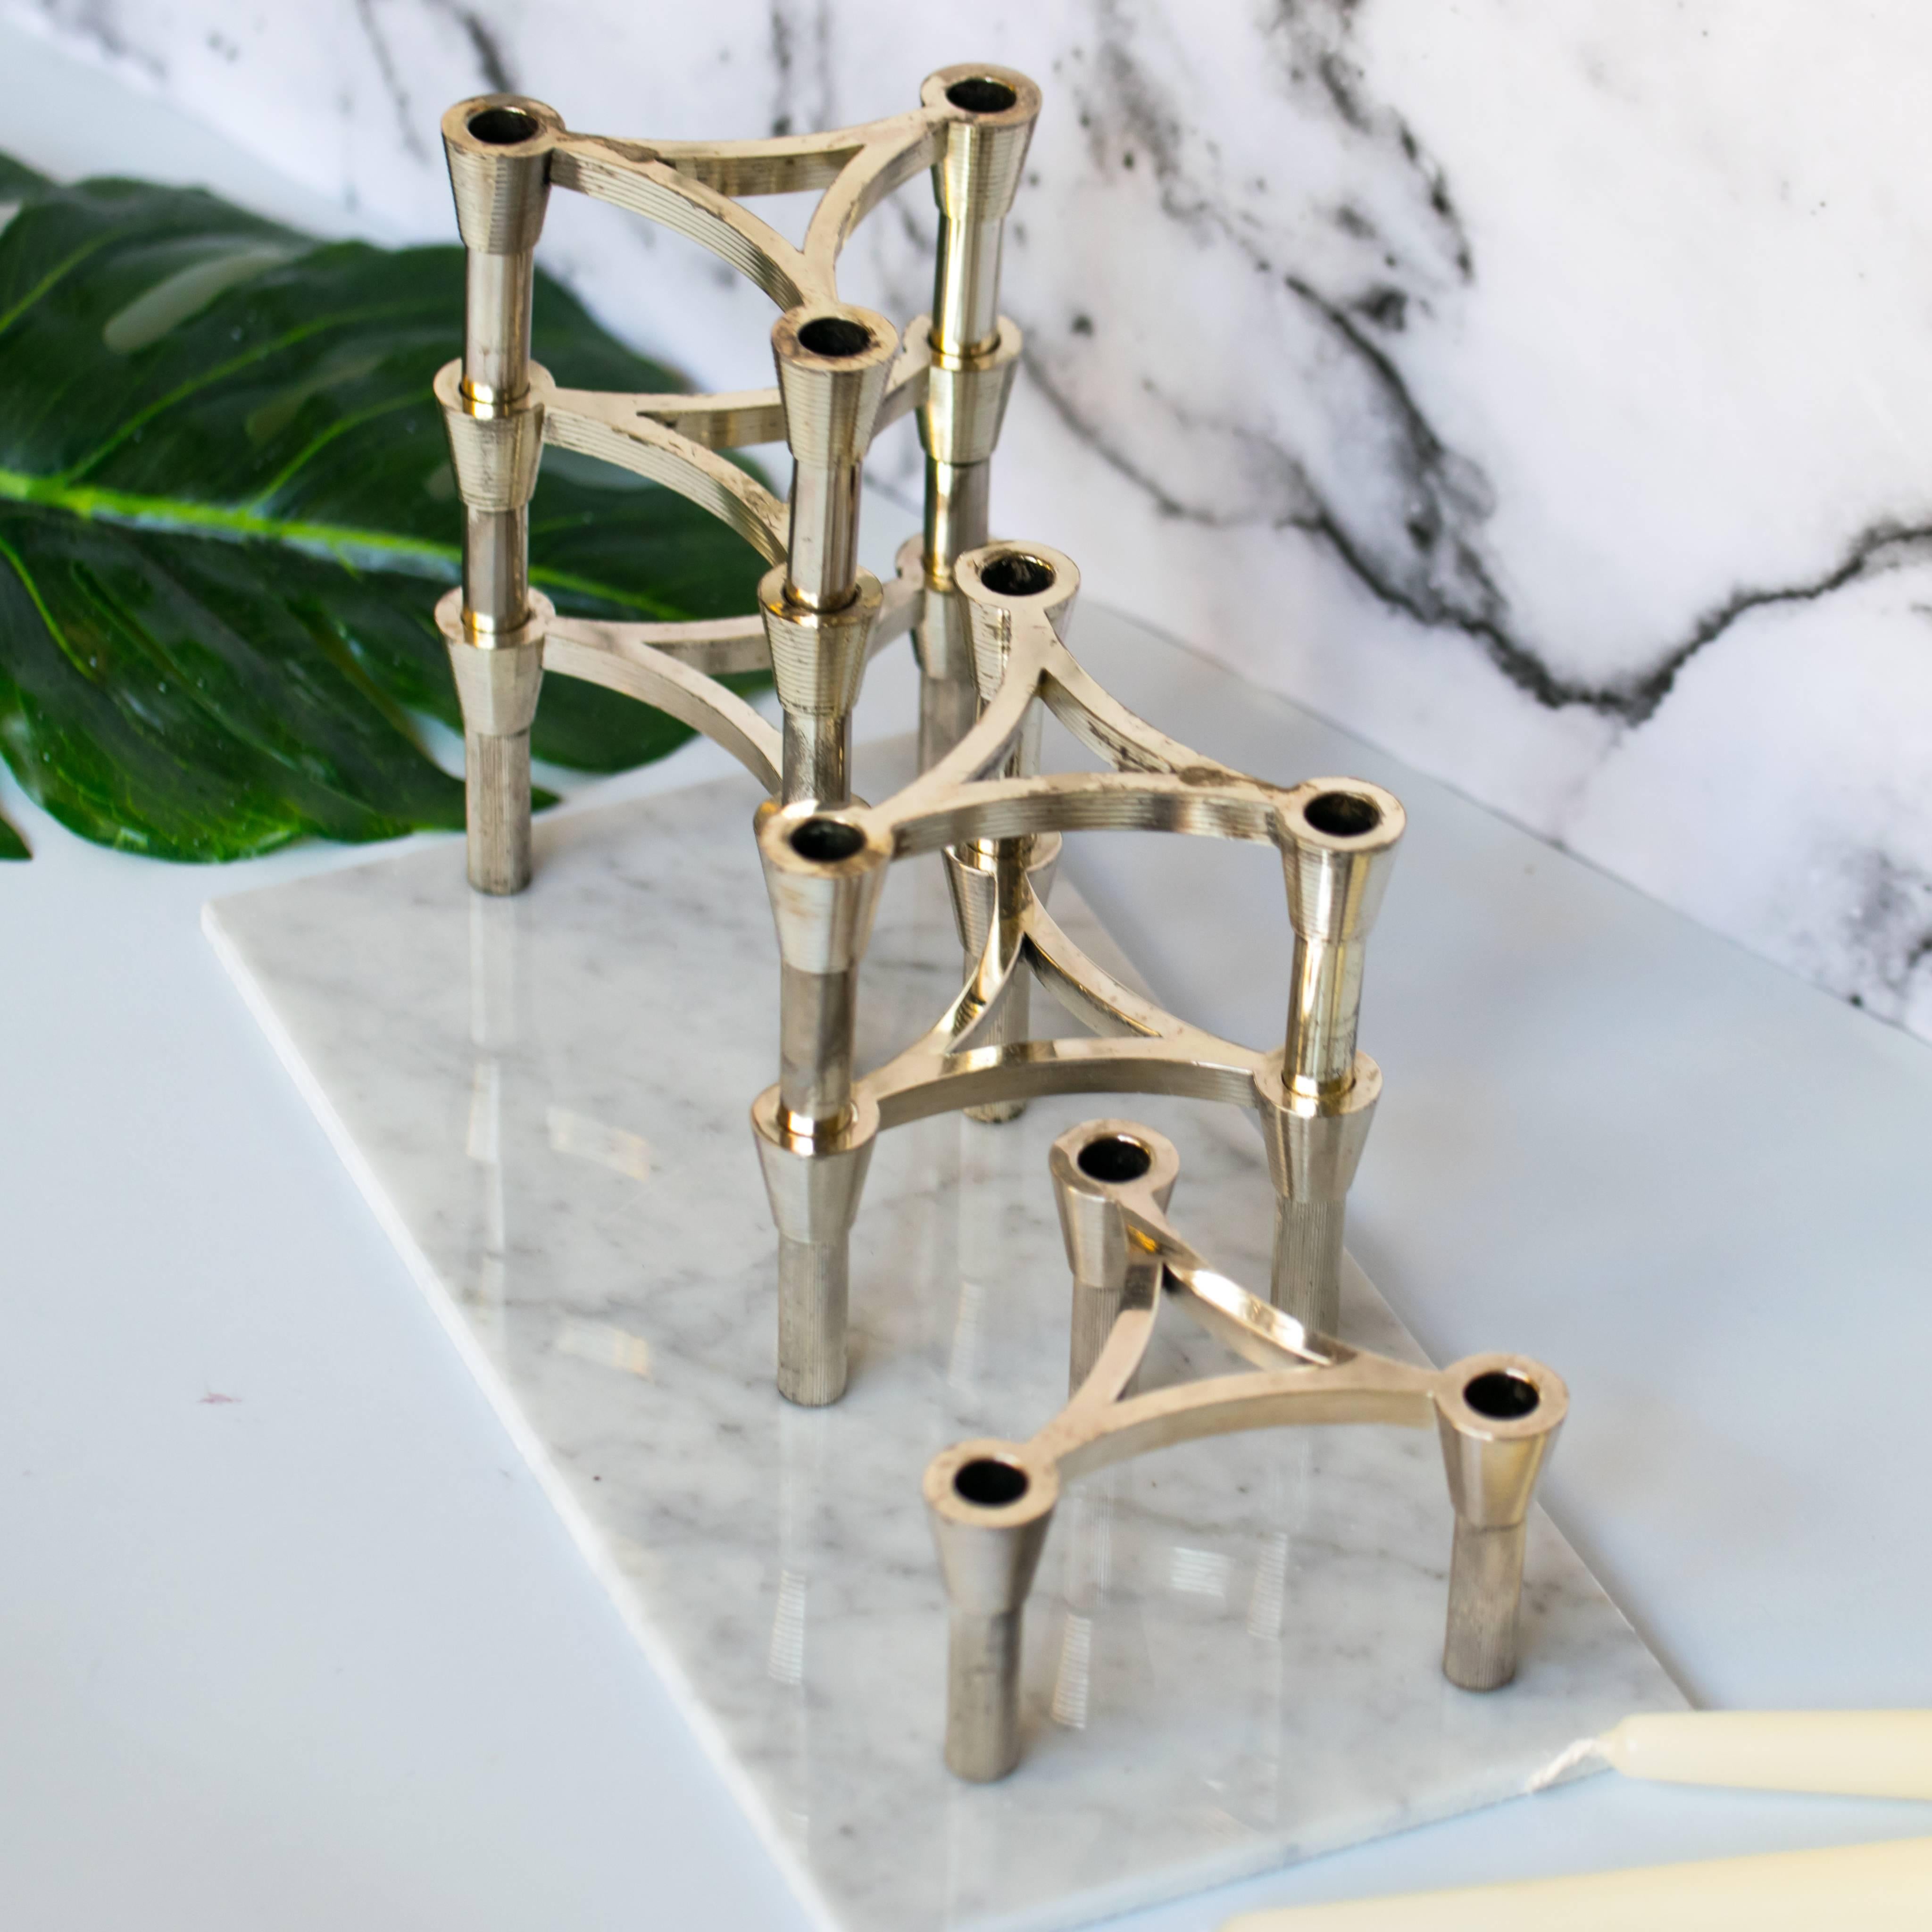 A striking set of Mid-Century Nagel and Stoffi Brutalist modular candle holders. The set consists of six units that can hold up to 18 candles.

The nickel, chrome-plated set of six pieces is modular and stackable so you can create your own shapes